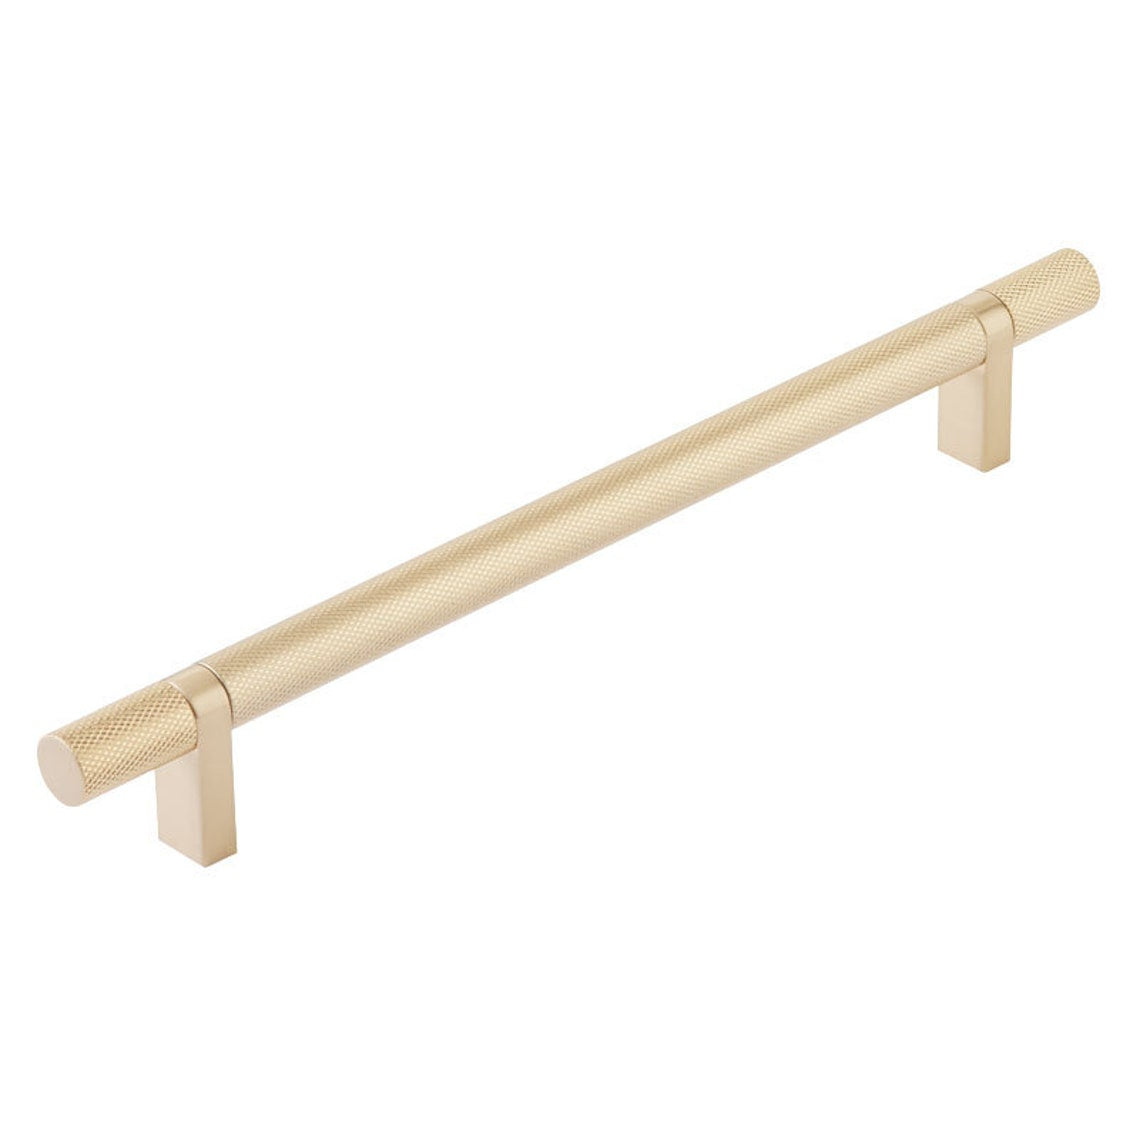 Knurled Select T-Bar Champagne Bronze Cabinet Knobs and Drawer Pulls - Industry Hardware